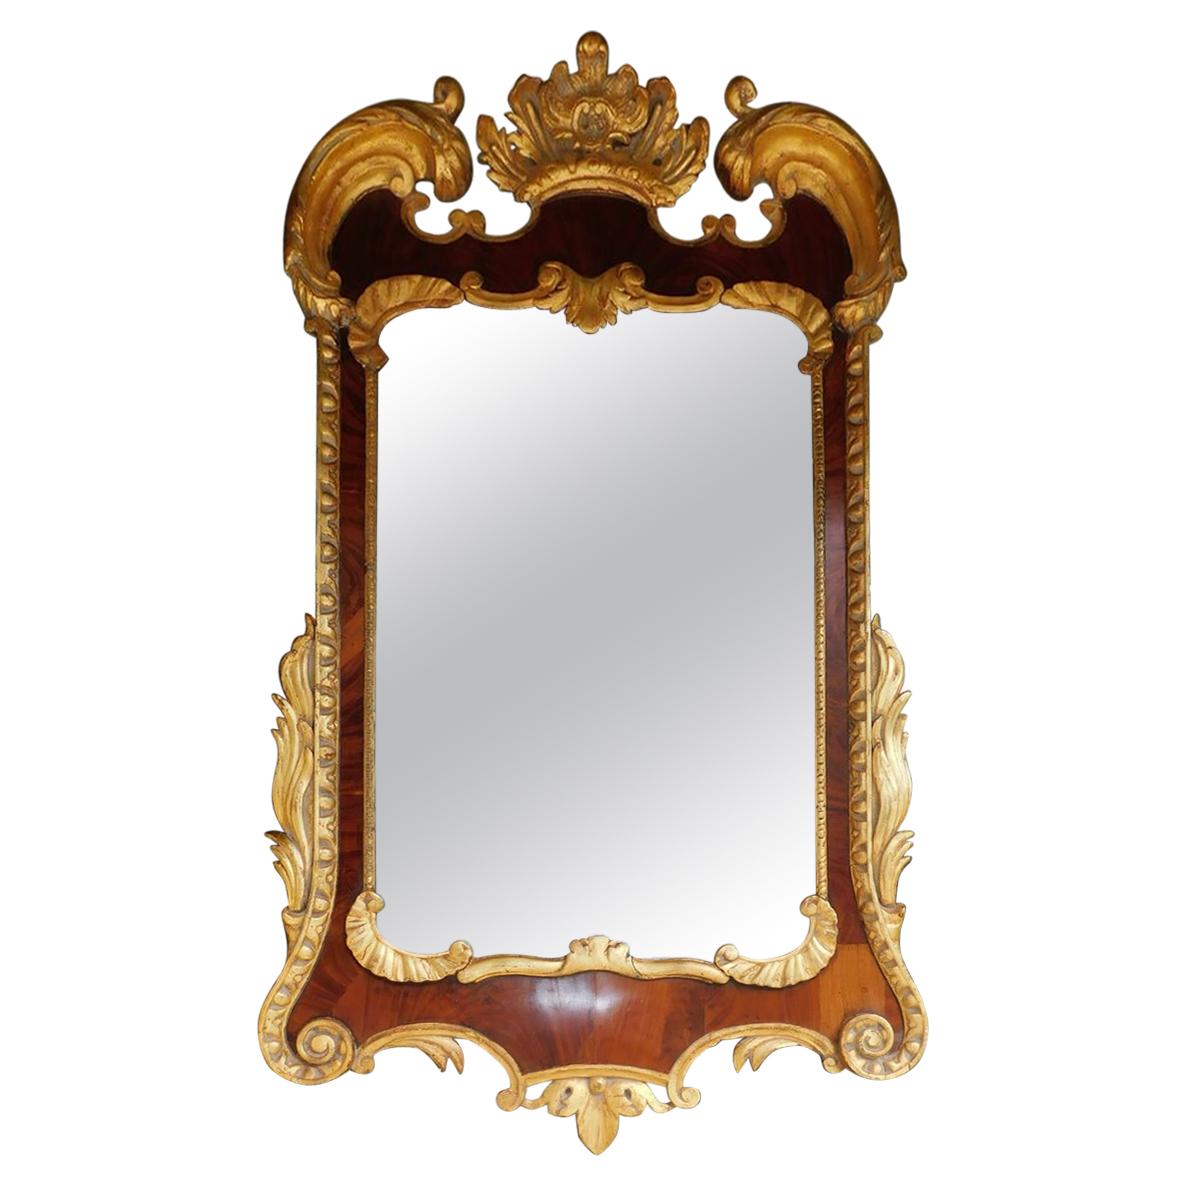 English Chippendale Mahogany Gilt Carved Wood & Gesso Floral Wall Mirror C. 1750 For Sale